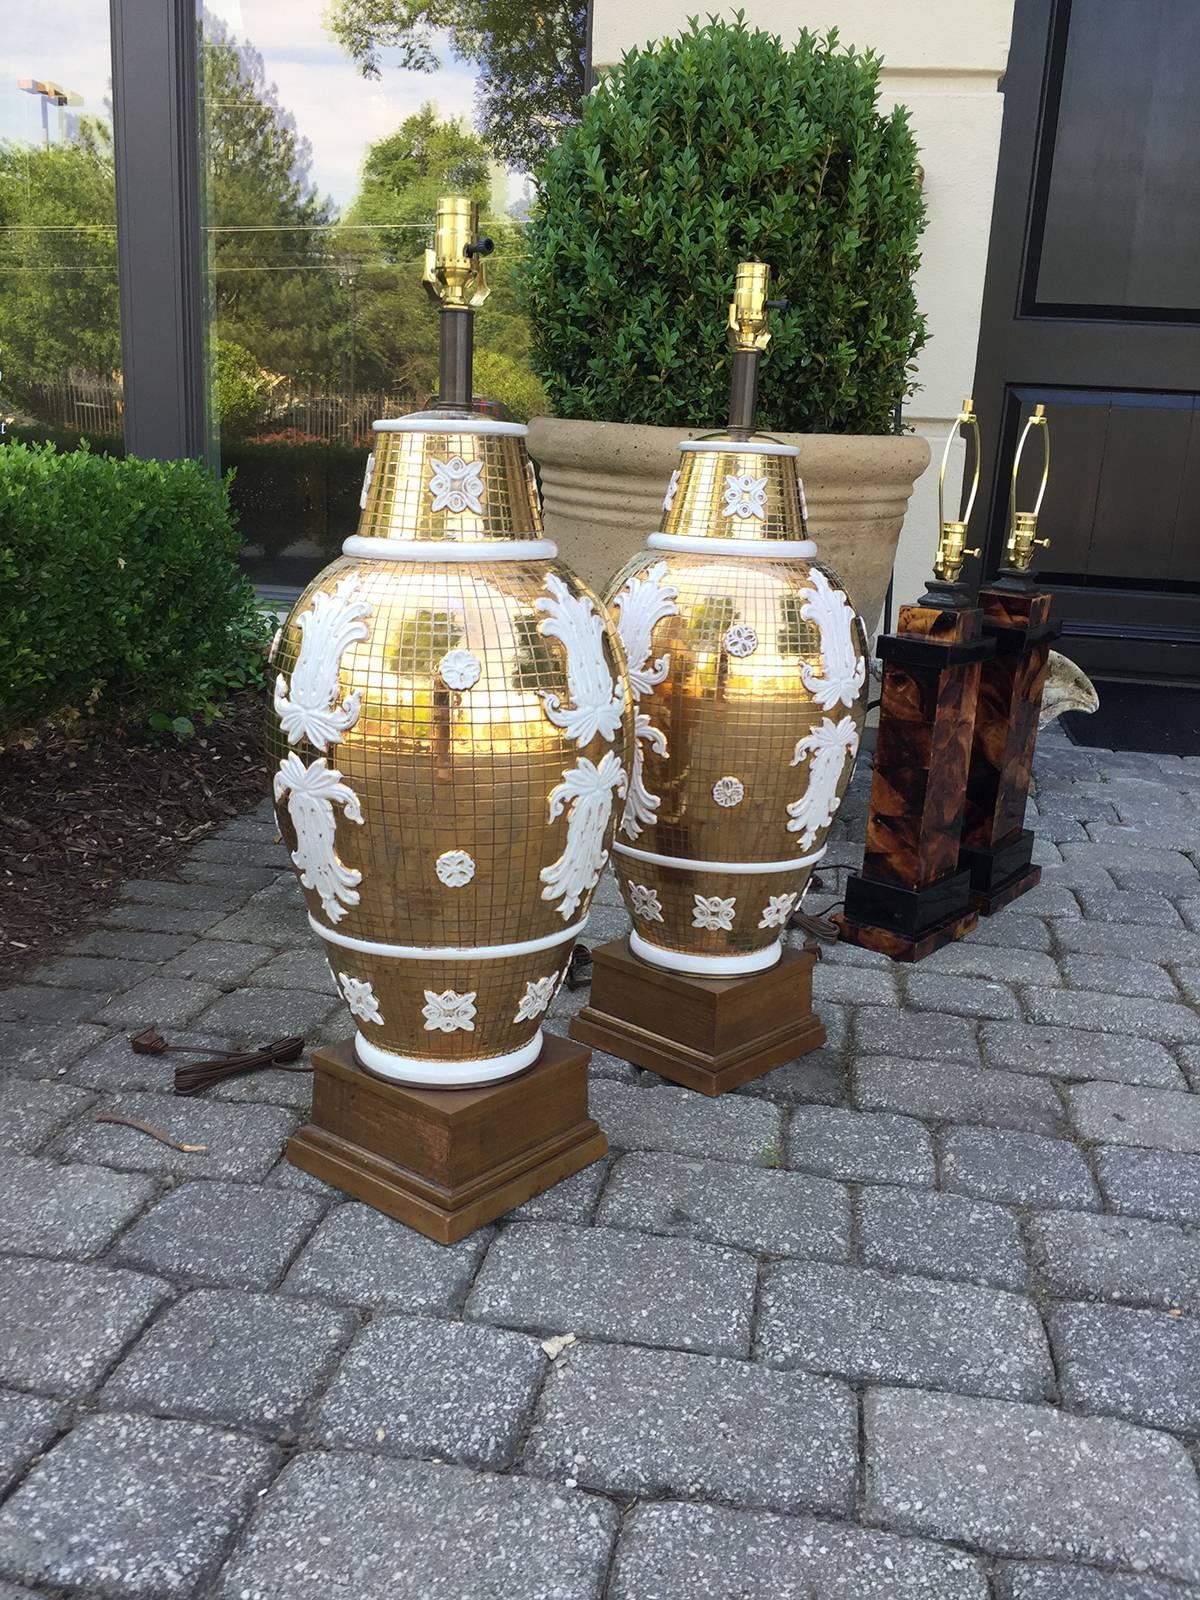 Pair of Mid-Century Italian ceramic lamps by Ugo Zaccagnini for Marboro, handcrafted Italian ceramic with metallic gold, scored body and white- glazed appliques, giltwood bases with brass necks.